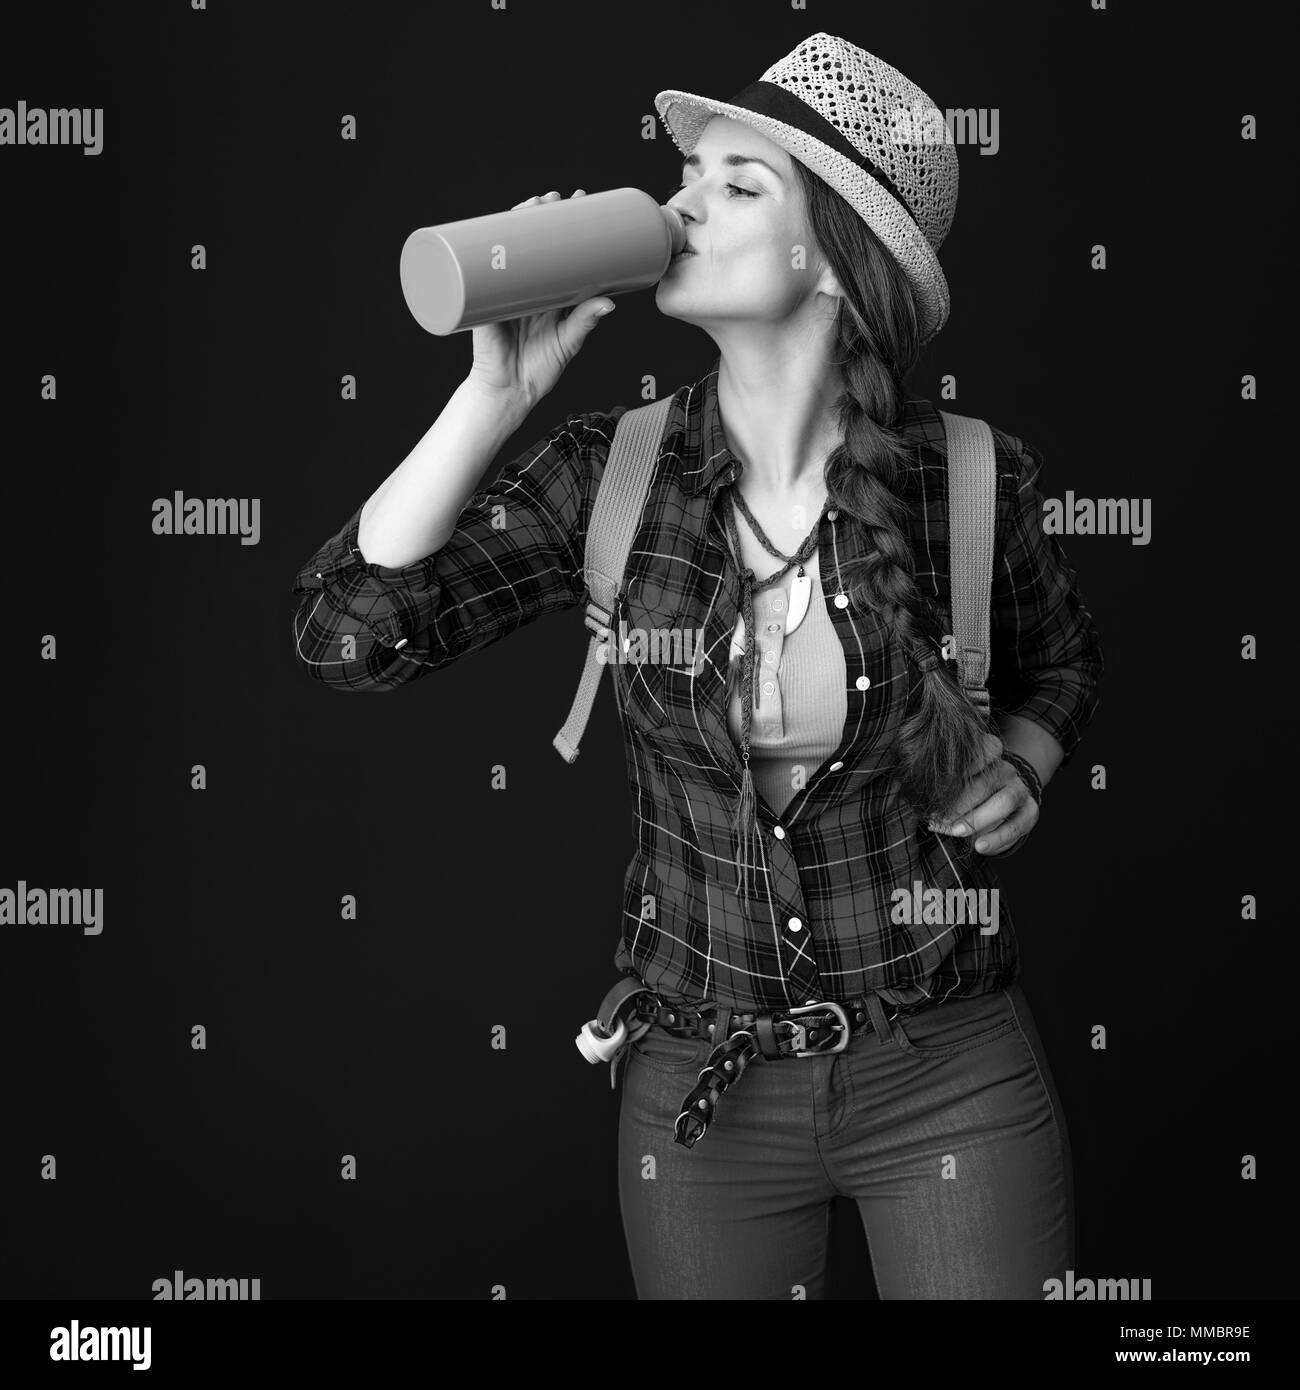 Searching for inspiring places. young traveller woman in a plaid shirt drinking water from bottle on background Stock Photo